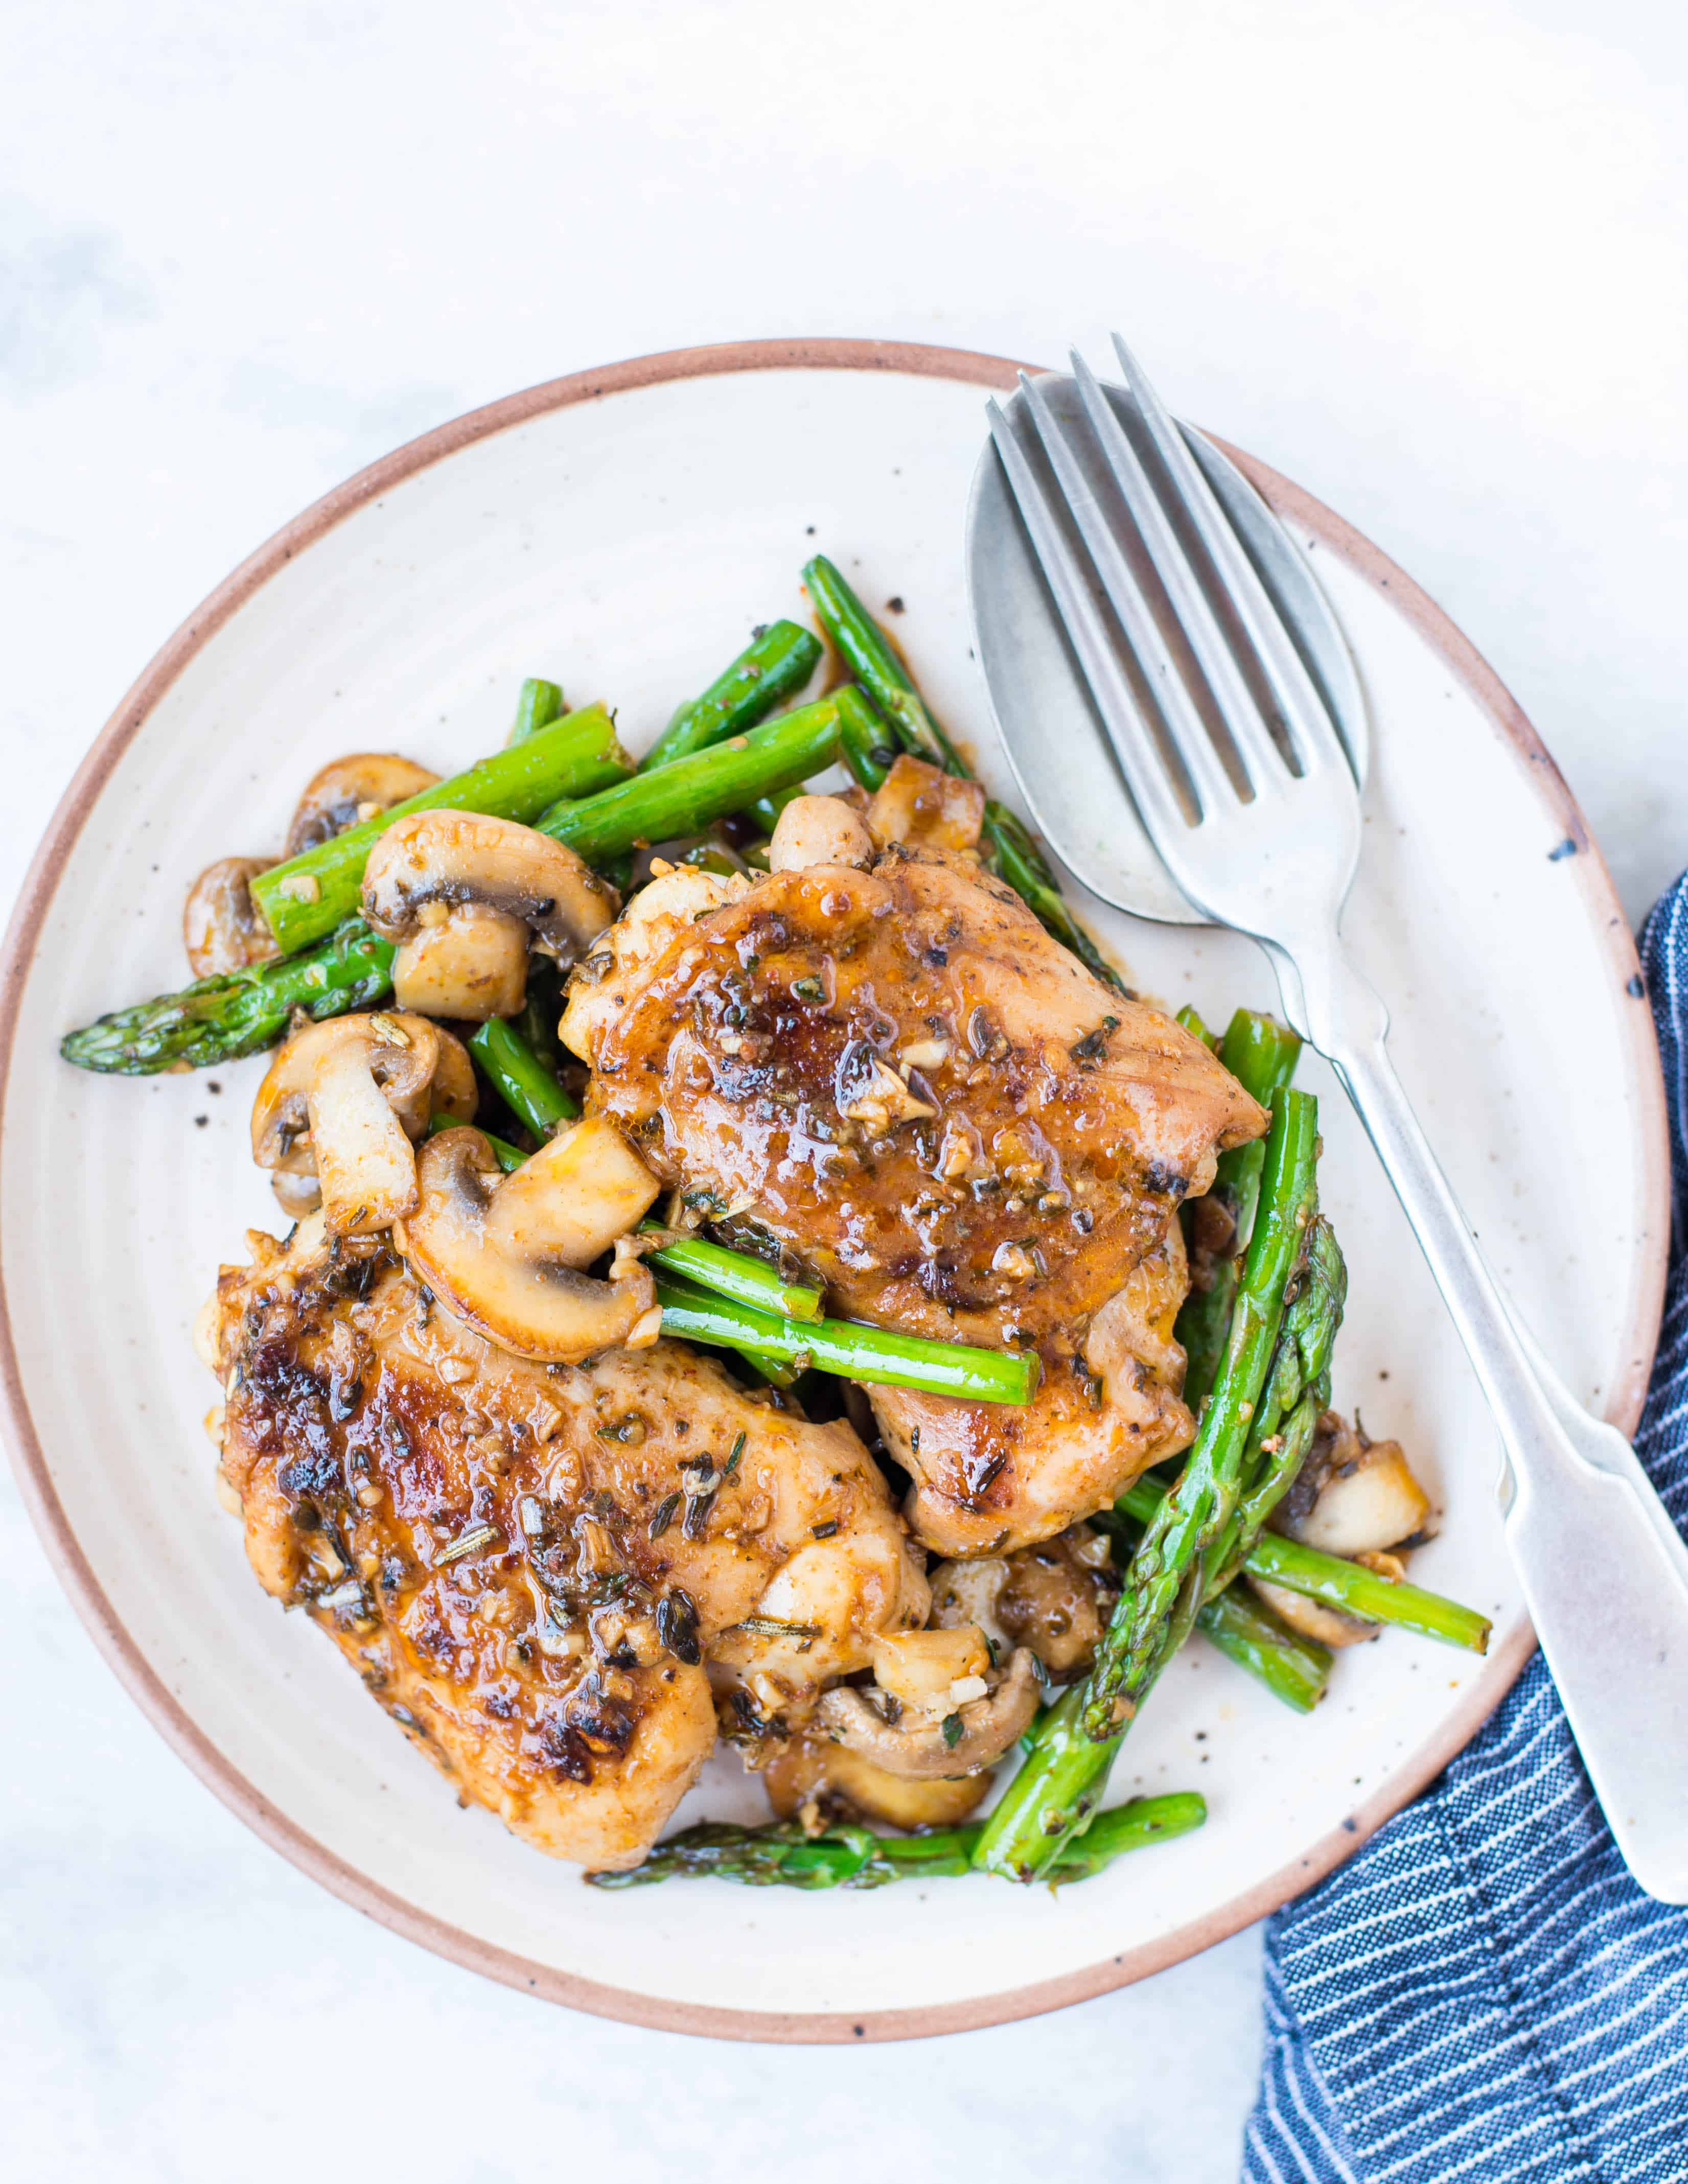 Chicken with lemon butter sauce and asparagus and mushroom served with spoon and fork.